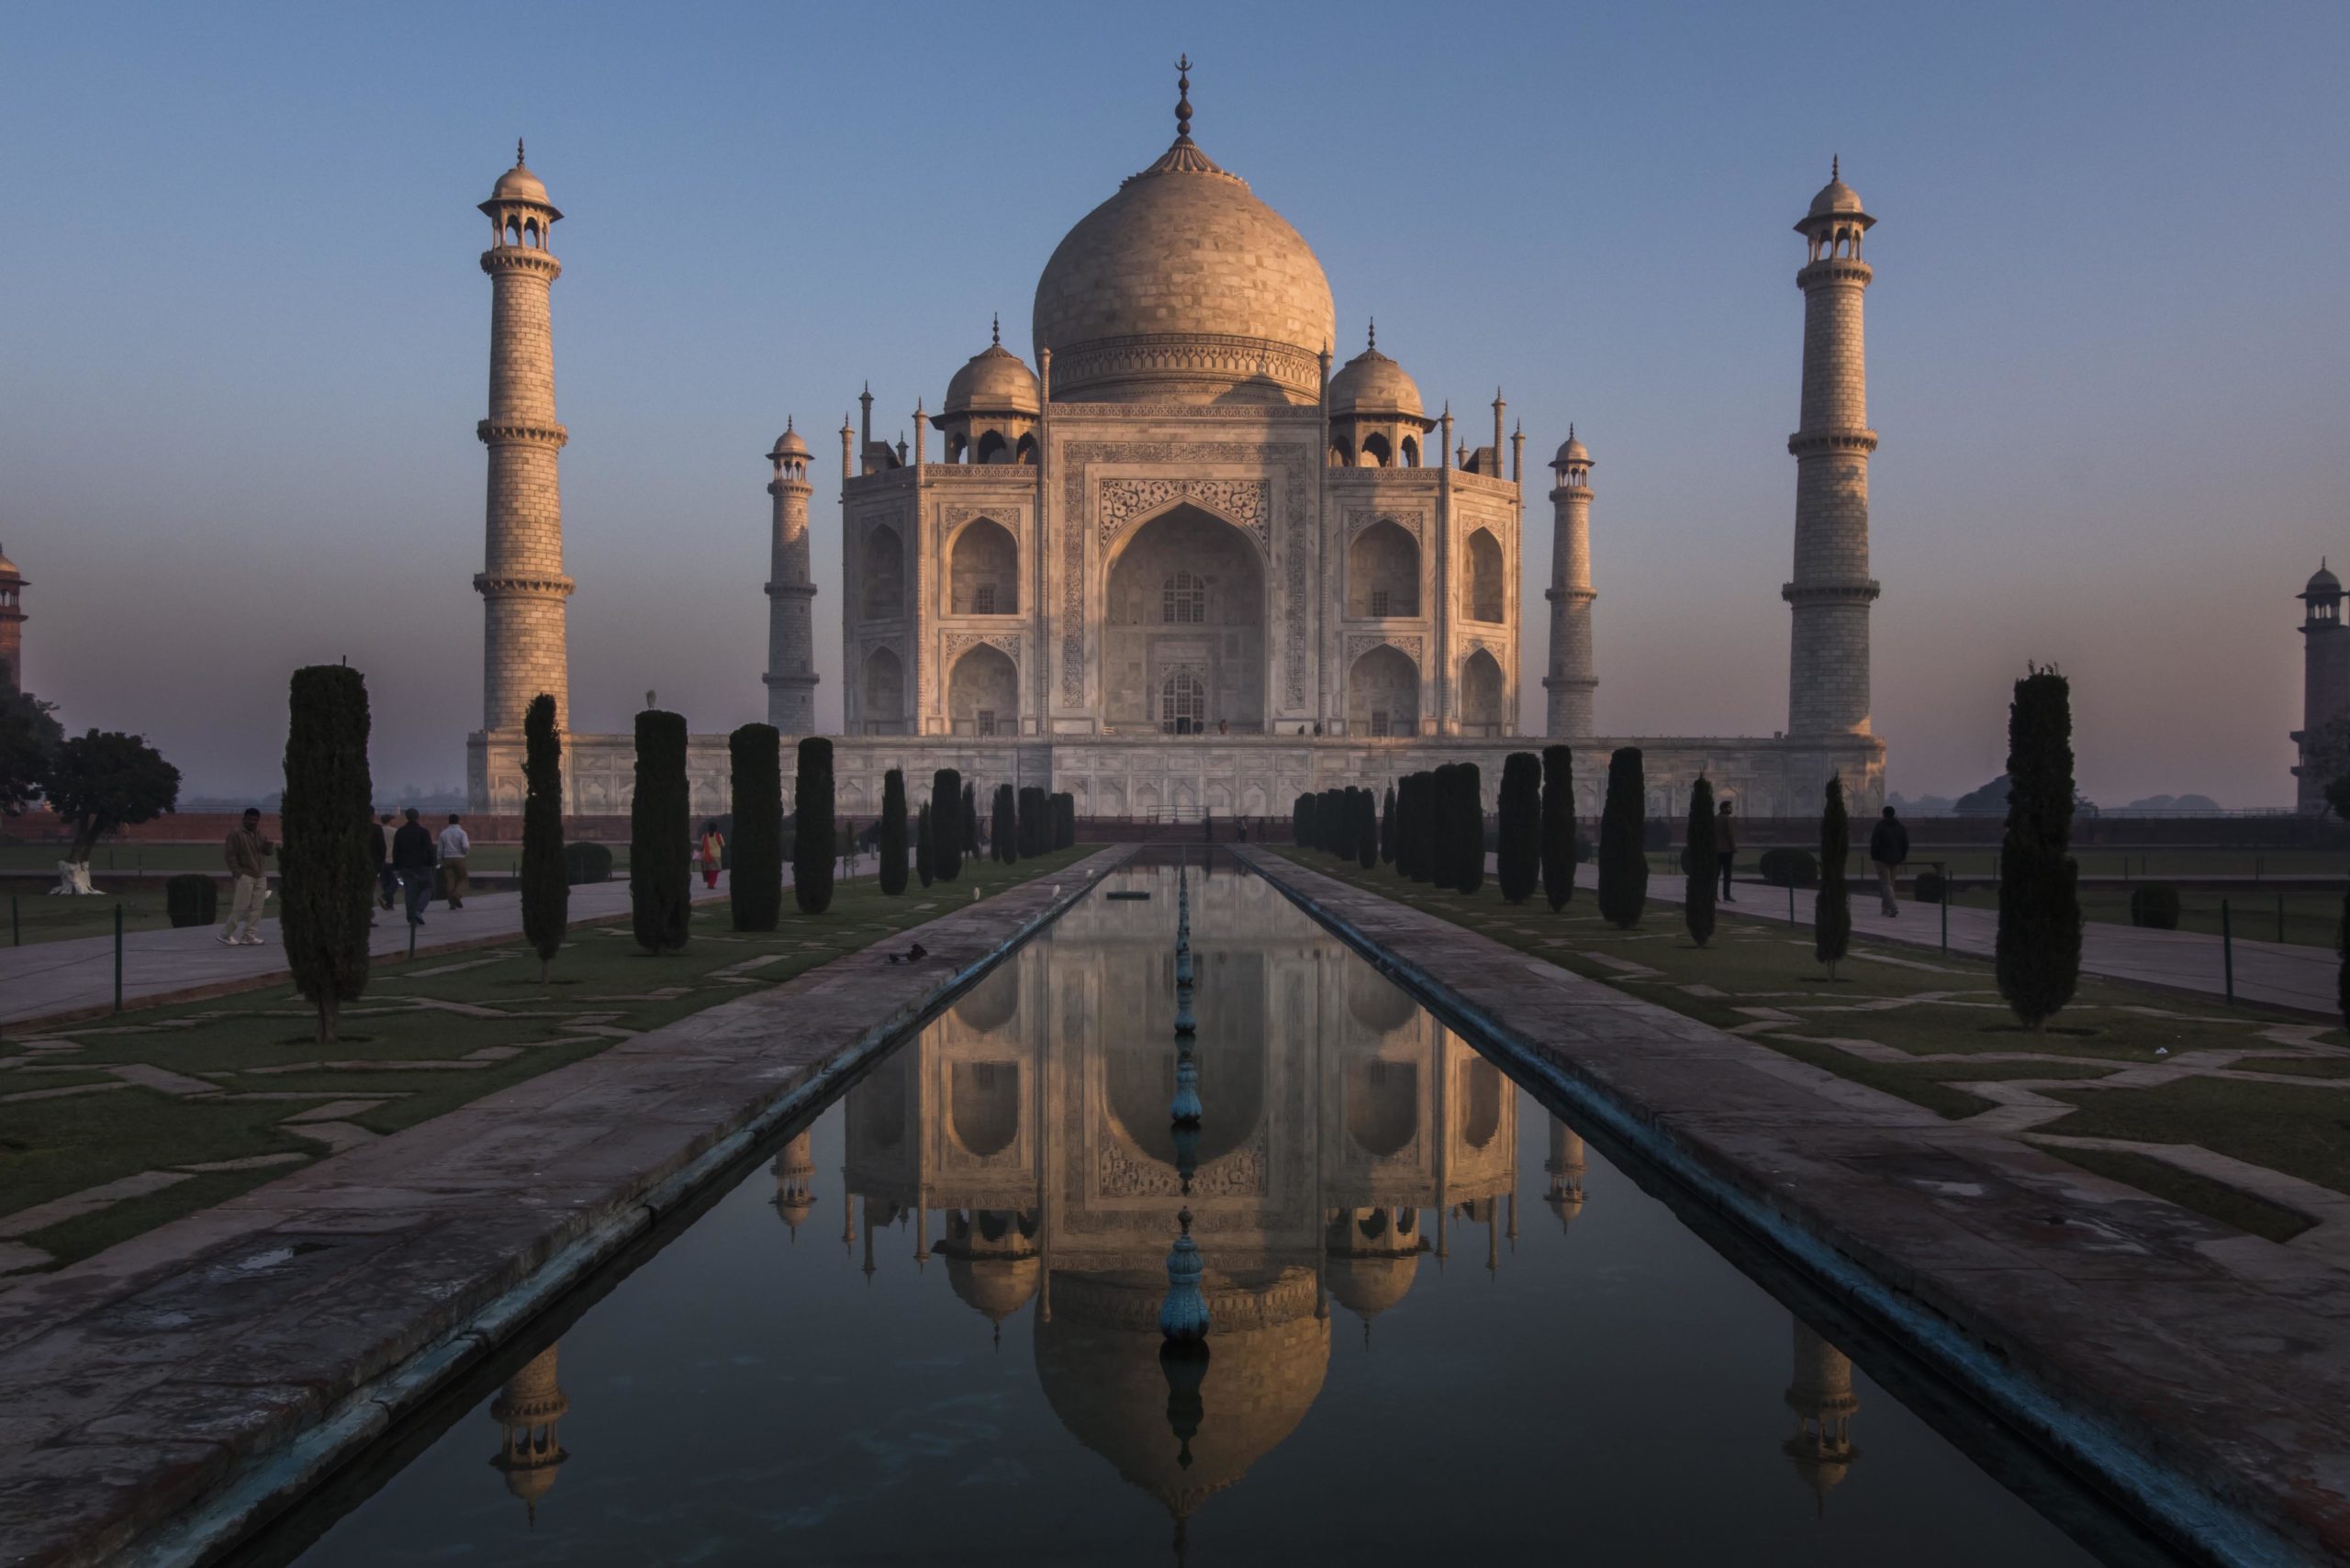 How to Enjoy the Best Sunrise Tour of the Taj Mahal: What to Expect, Tips, and Tricks